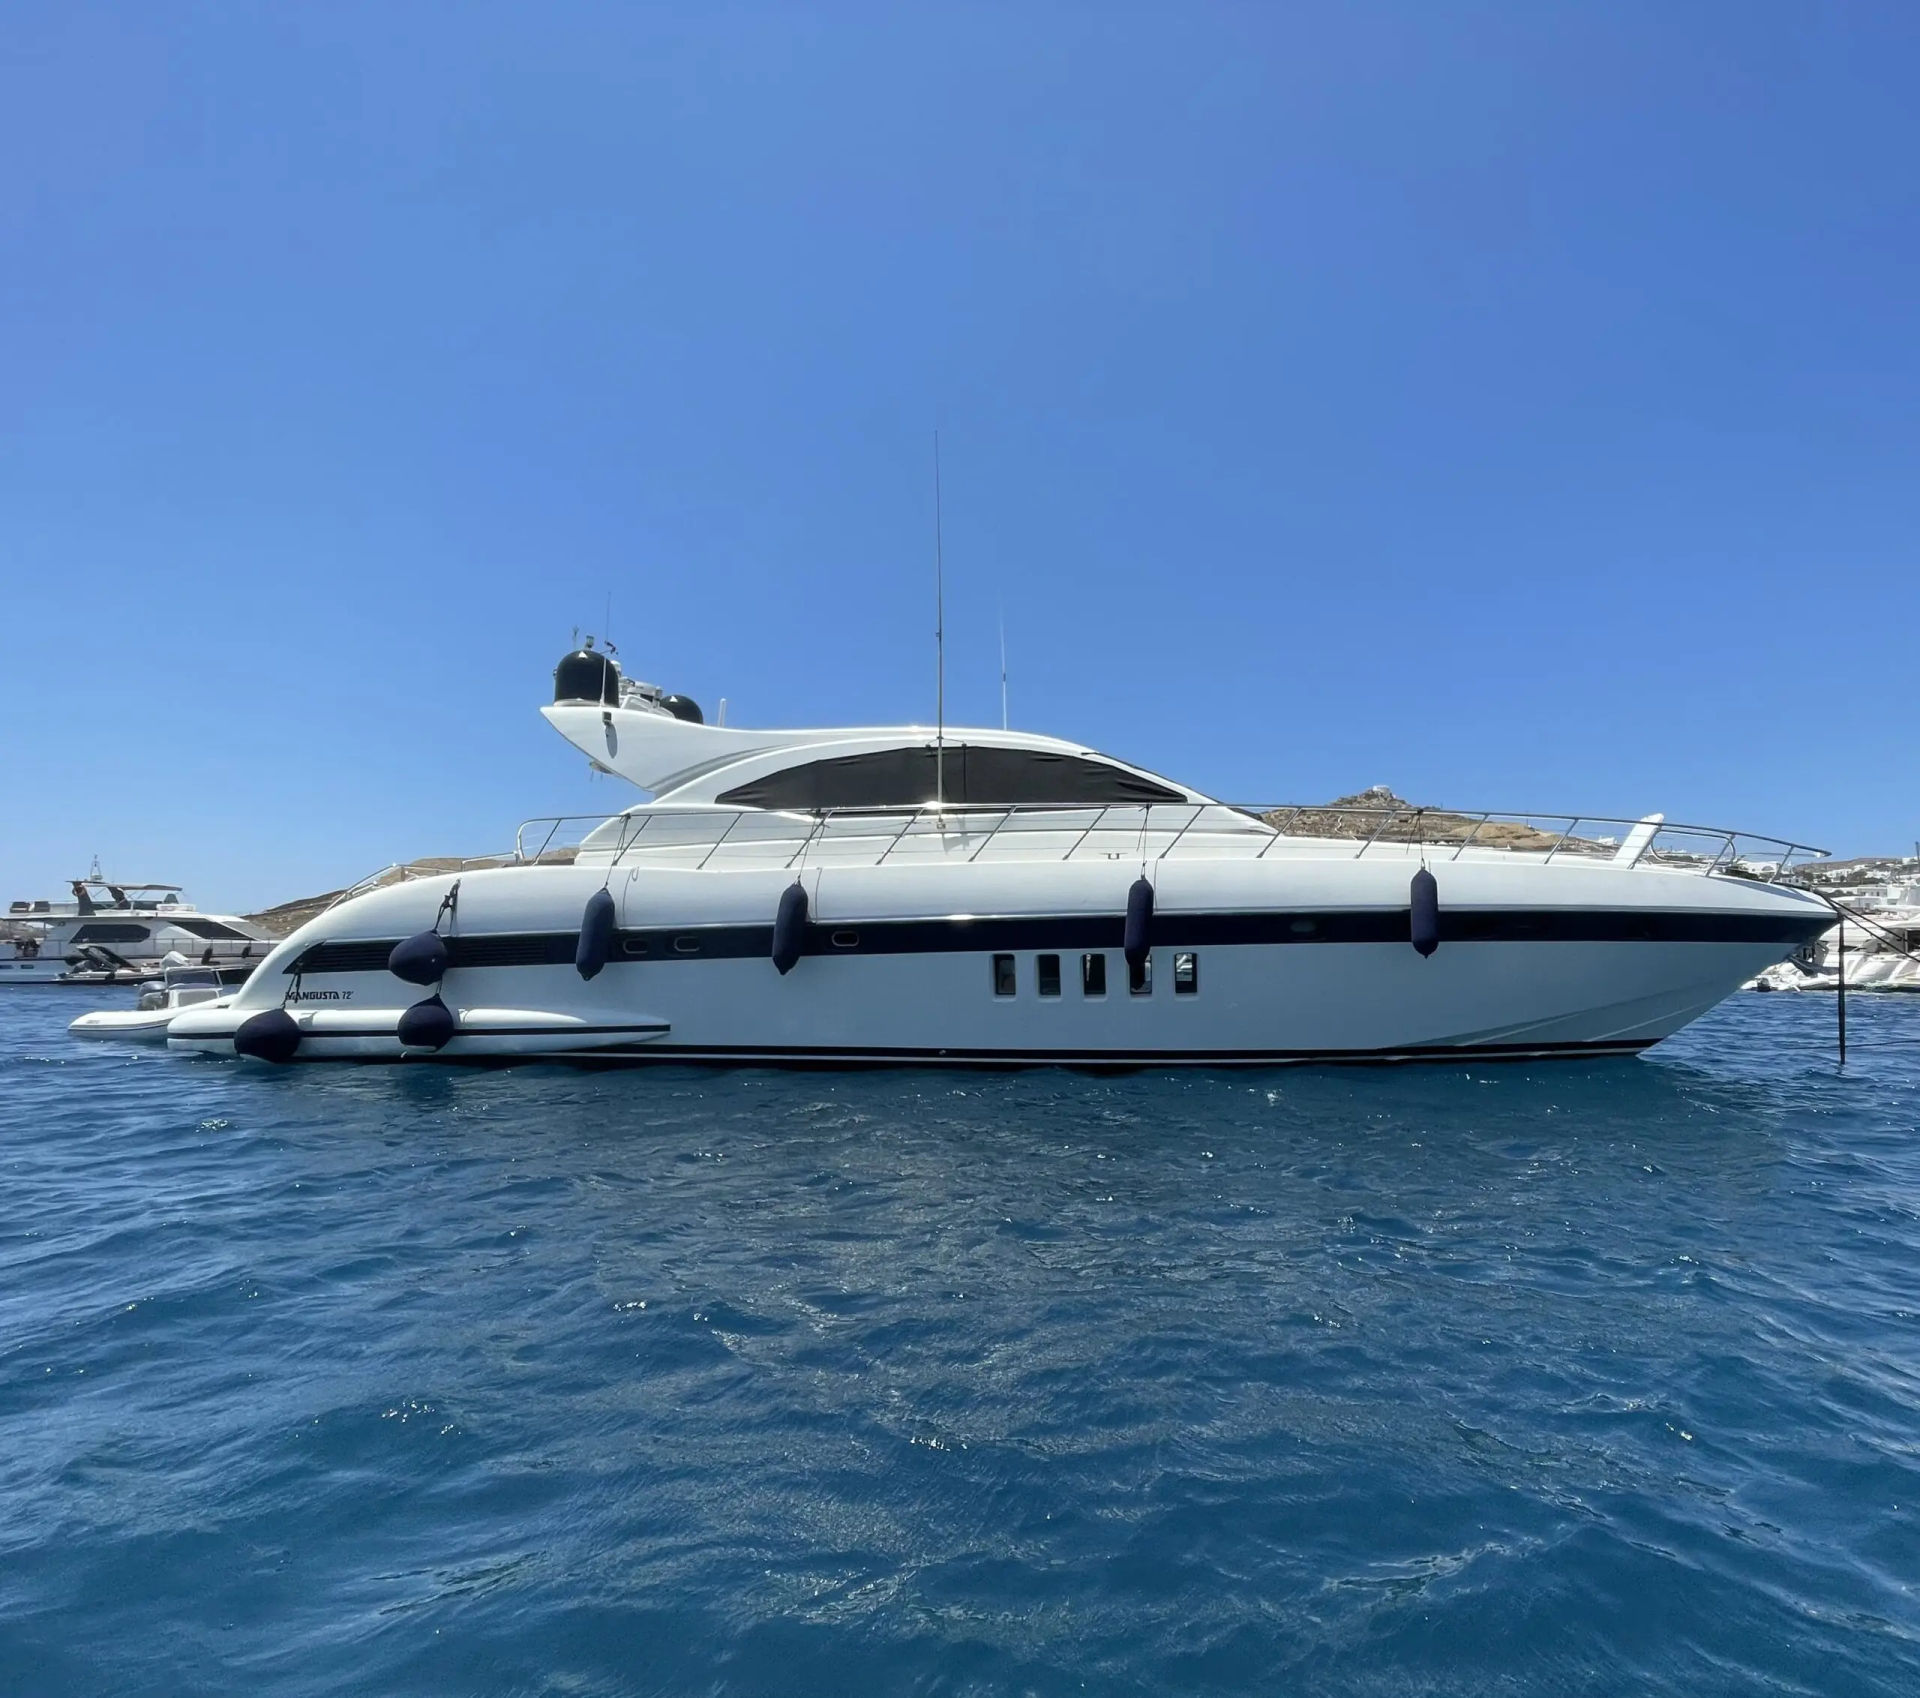 Mykonos South Coastline Luxury Private Cruise Mangusta 72 Golden Yachting and Sailing